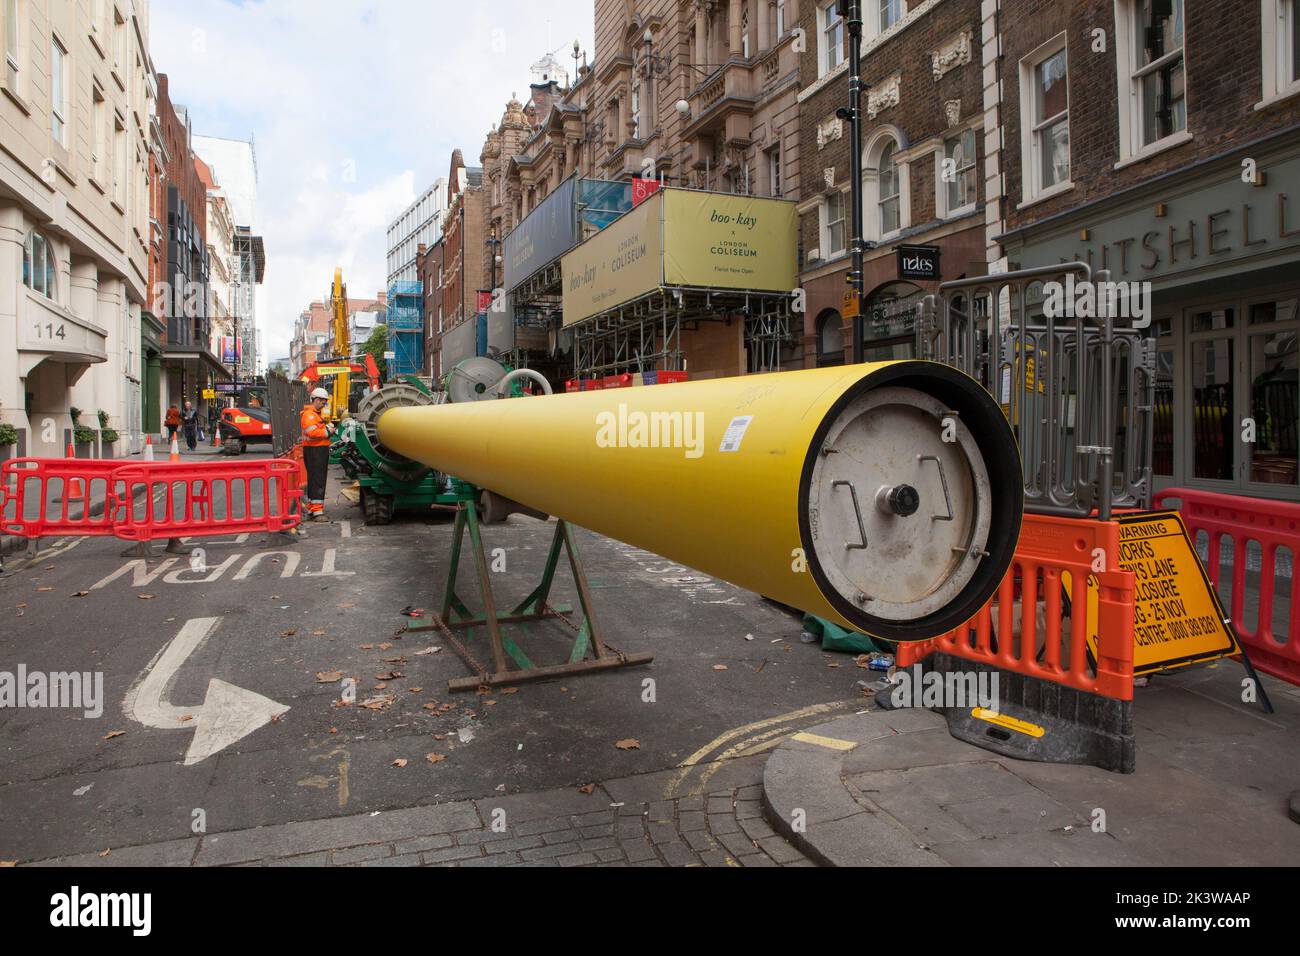 London, UK, 28 September 2022: Road works on St Martin's Lane where a gas main is being replaced. Anna Watson/Alamy Live News Stock Photo